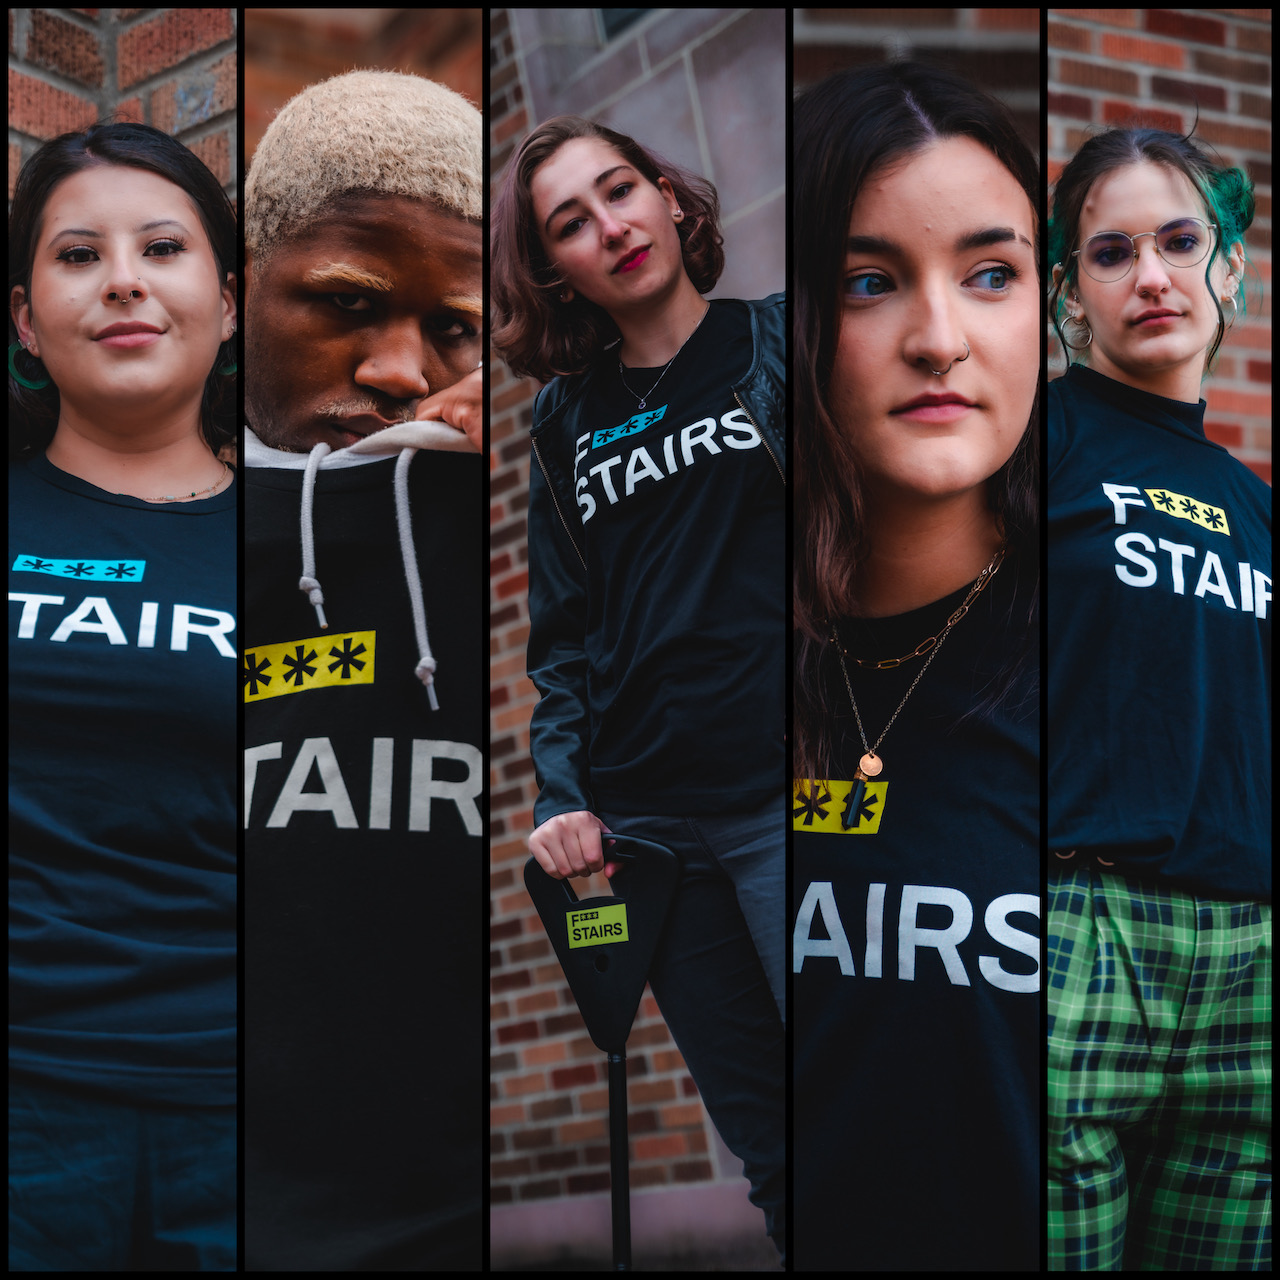 Image of various activist at UW wearing f stairs t shirts